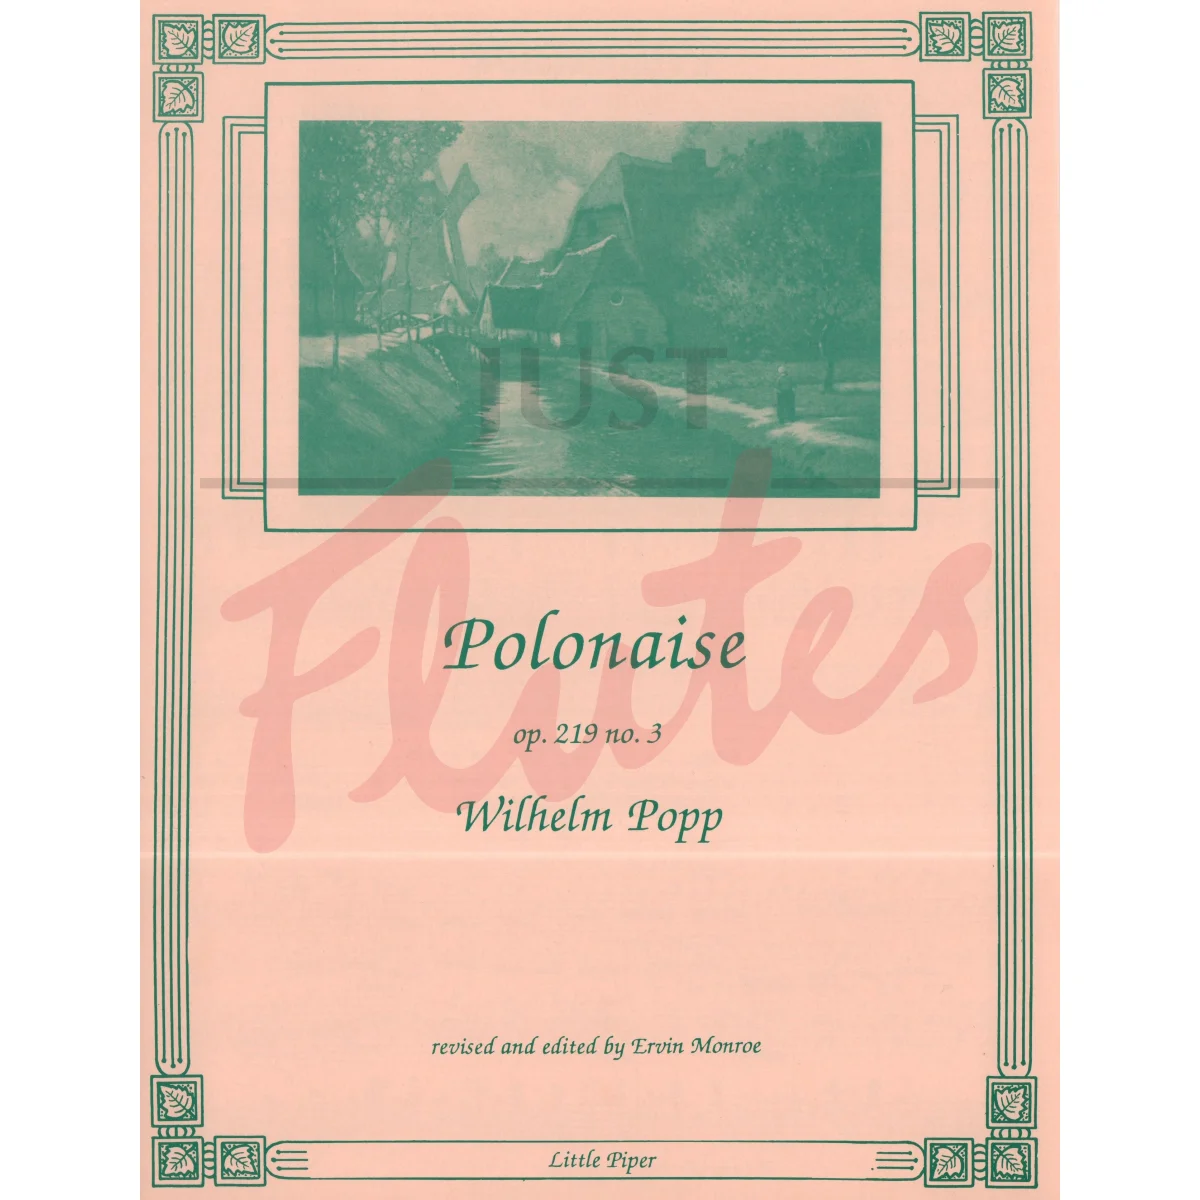 Polonaise for Flute and Piano